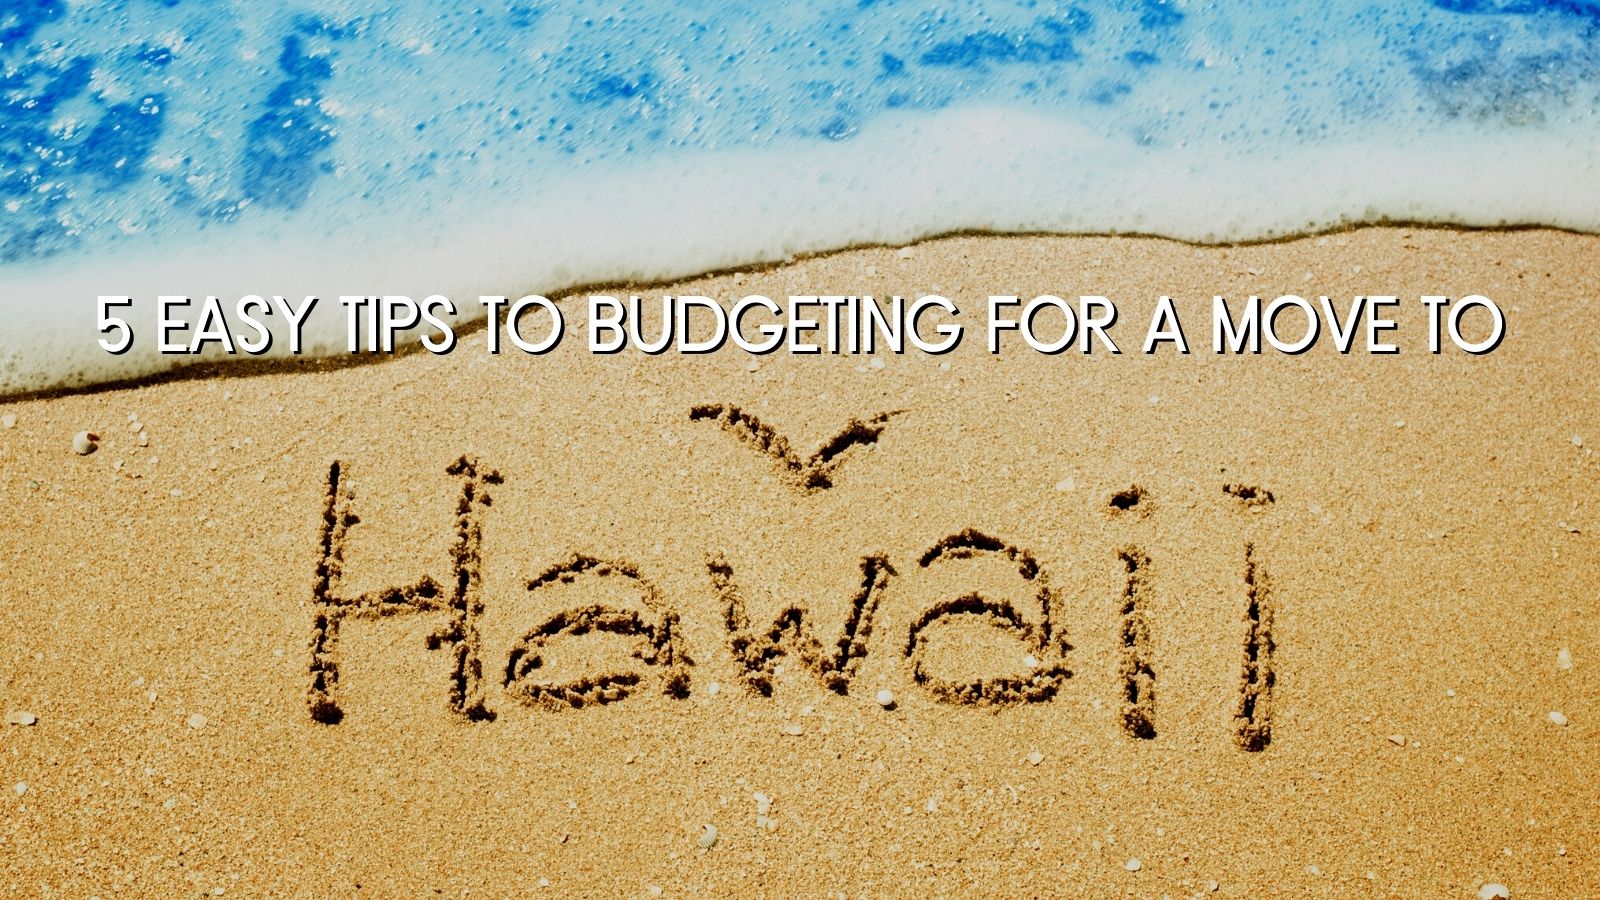 5 Easy Tips to Budgeting for a Move to Hawaii